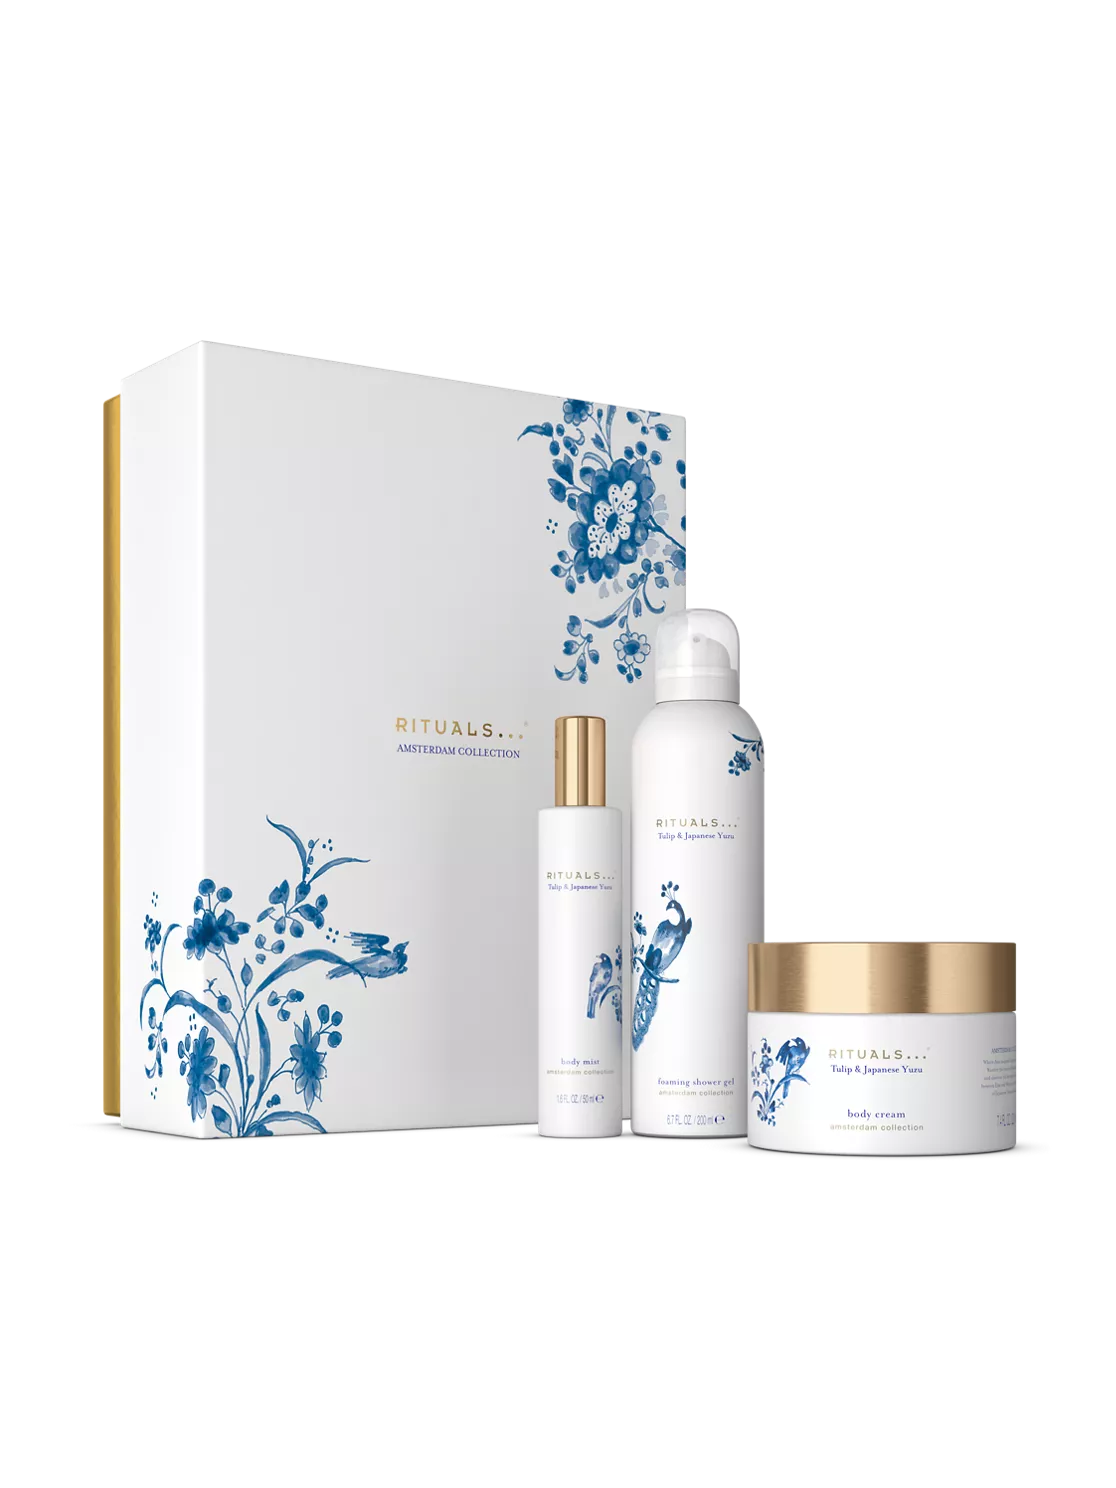 RITUALS® Amsterdam Collection - Gift set